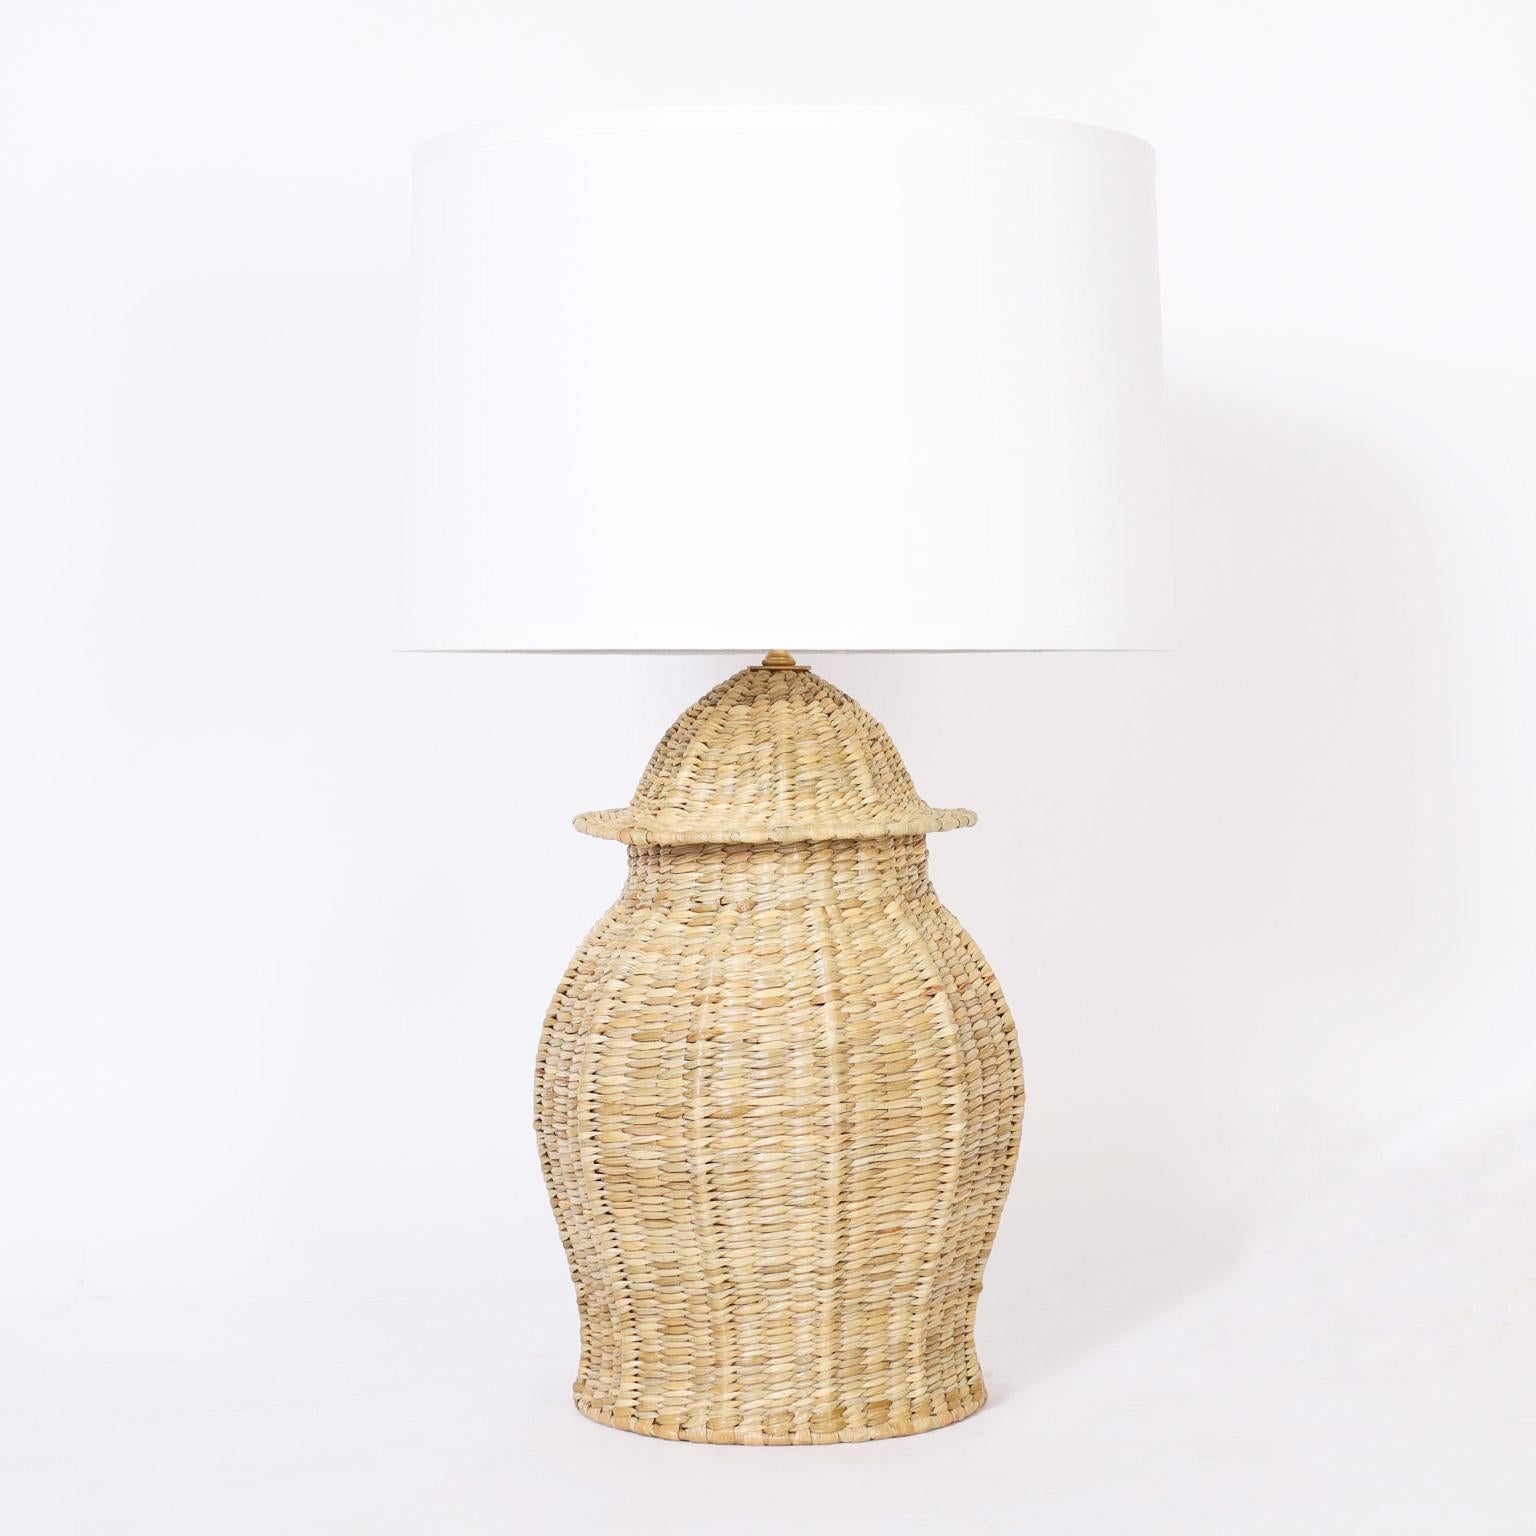 Asian modern style table lamps crafted with wicker or reed in a classic ginger jar form from the FS Flores Collection, designed and offered exclusively by F.S. Henemader Antiques.